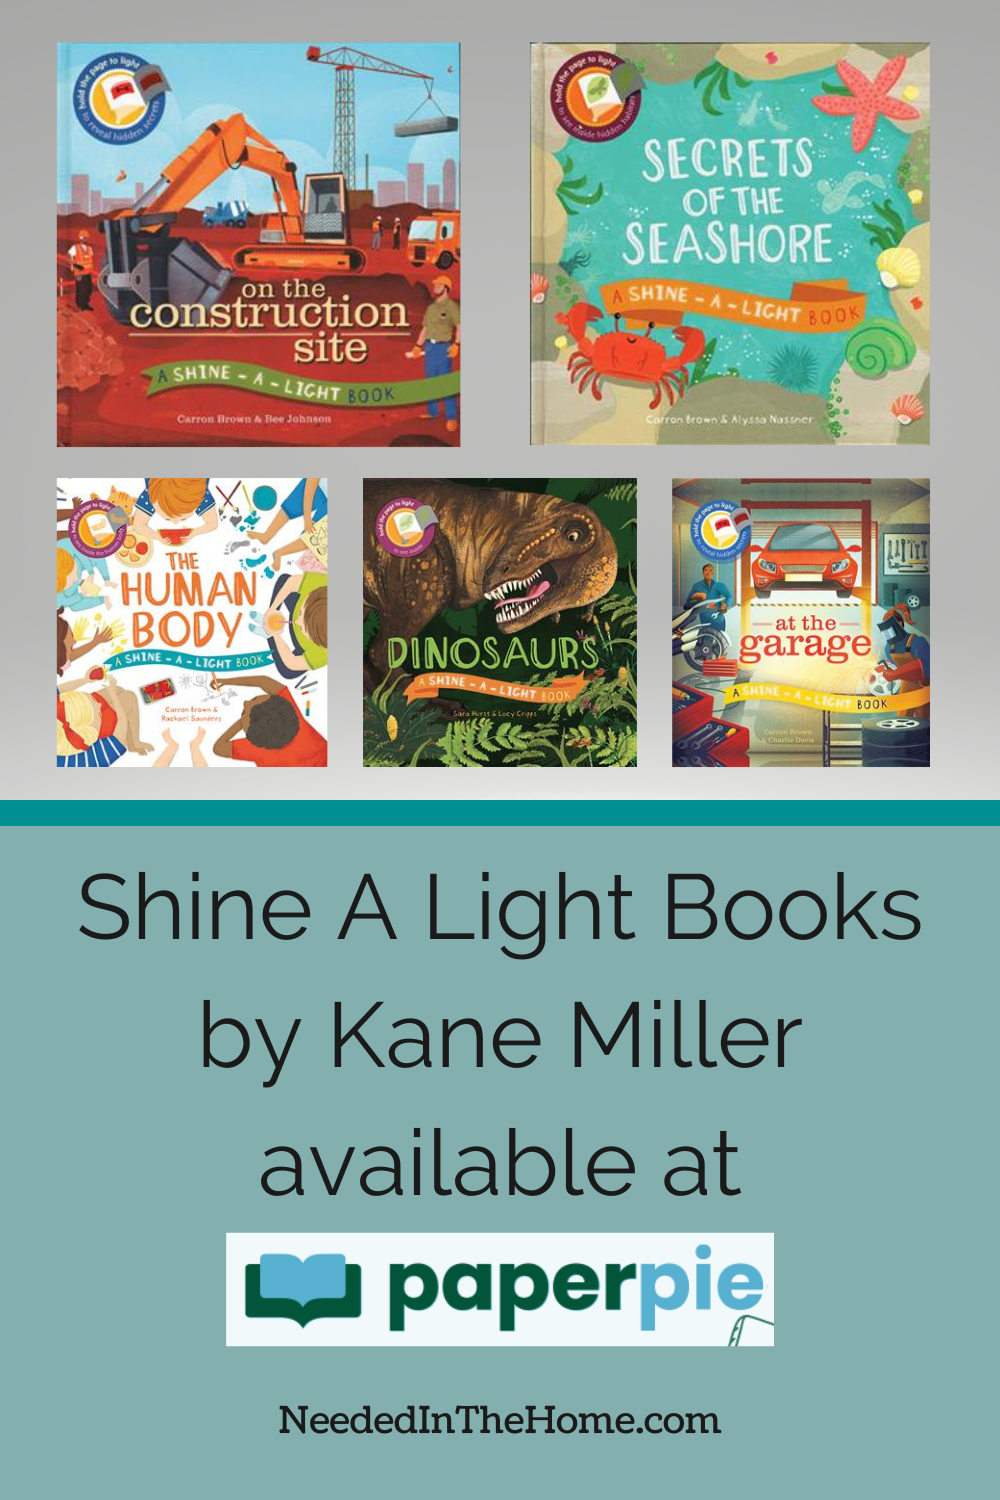 pinterest pin description shine a light books by kane miller available at paperpie neededinthehome five examples of books from this series